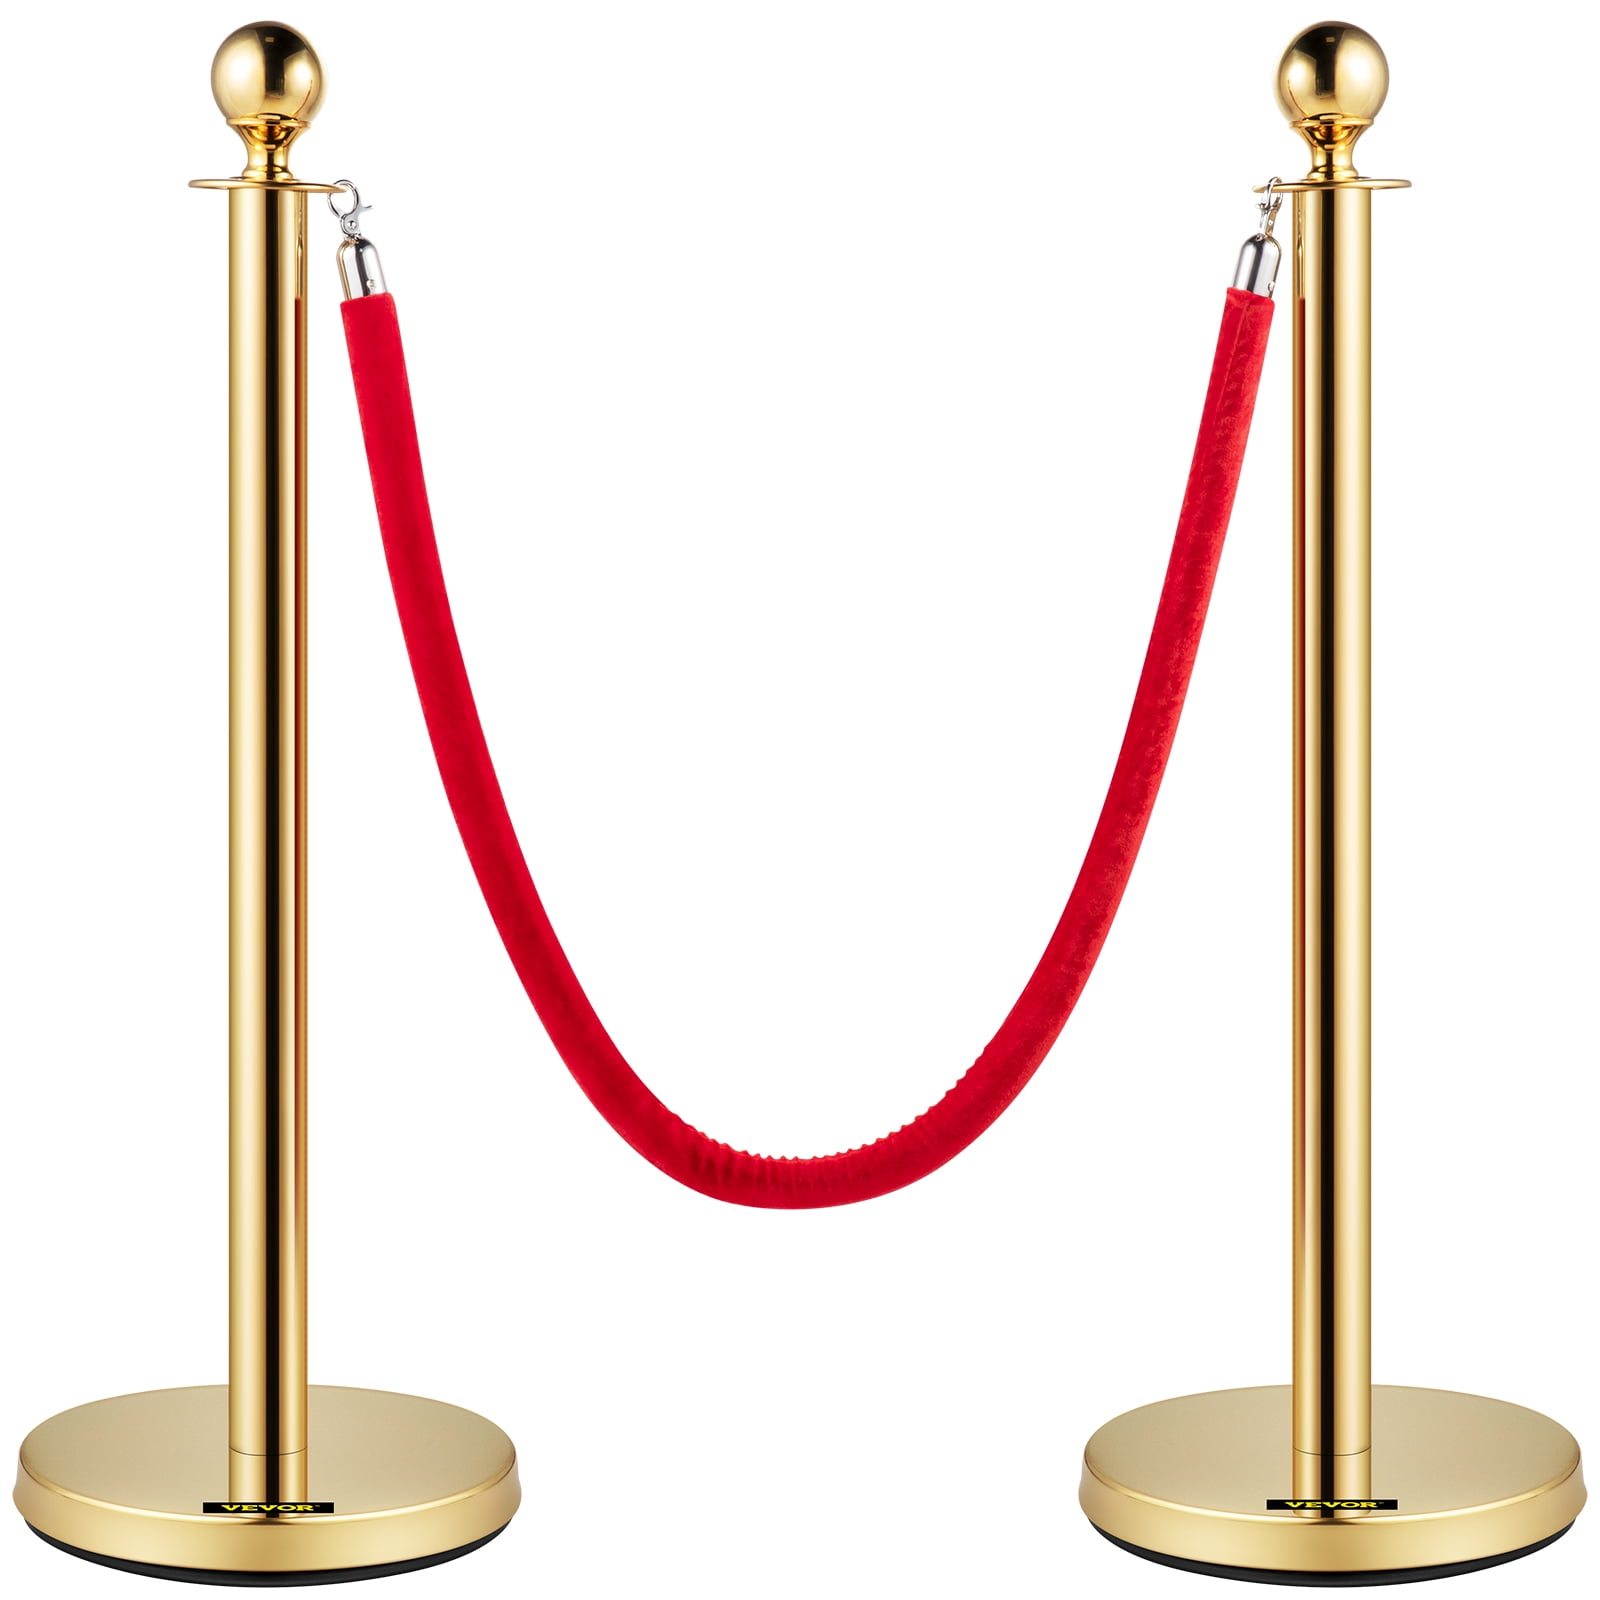 VEVOR Velvet Ropes and Posts, 5 ft/1.5 M Red Rope, Stainless Steel Gold Stanchion with Ball Top, Red Crowd Control Barrier used for Theaters, Party